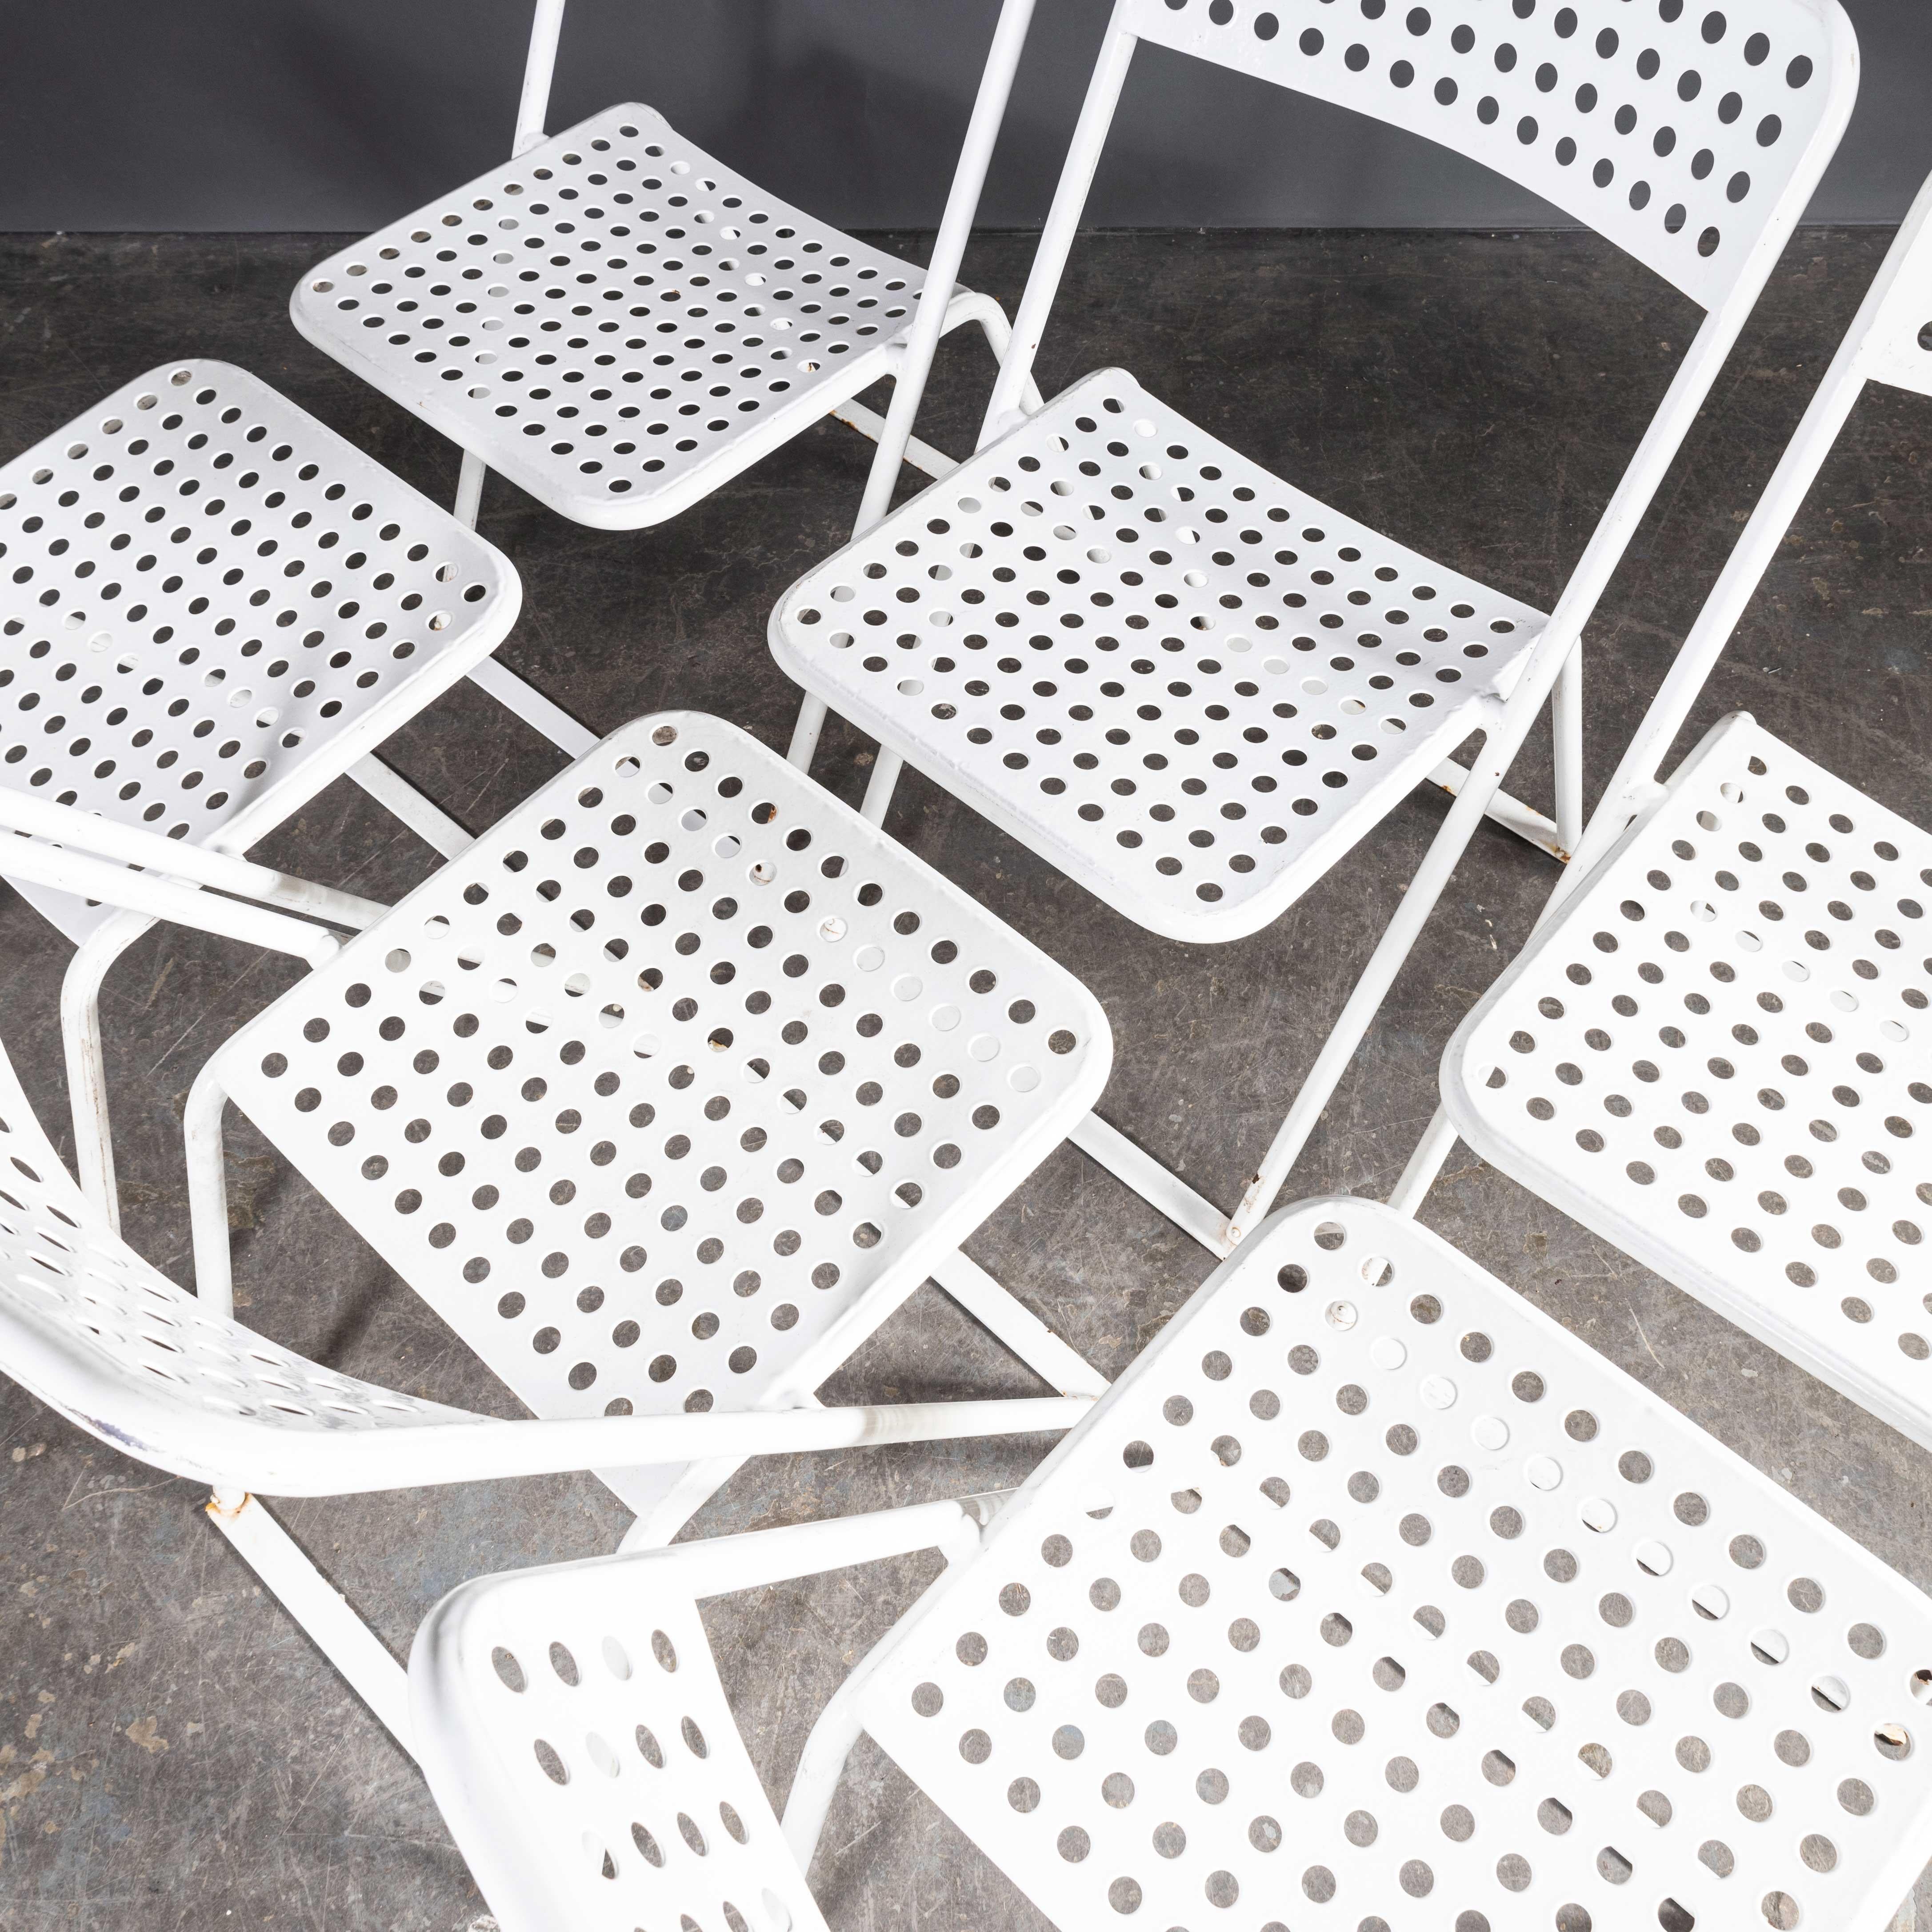 1970’s Egon Eiremann House in Baden Baden White Metal Chairs - Set Of Six For Sale 3